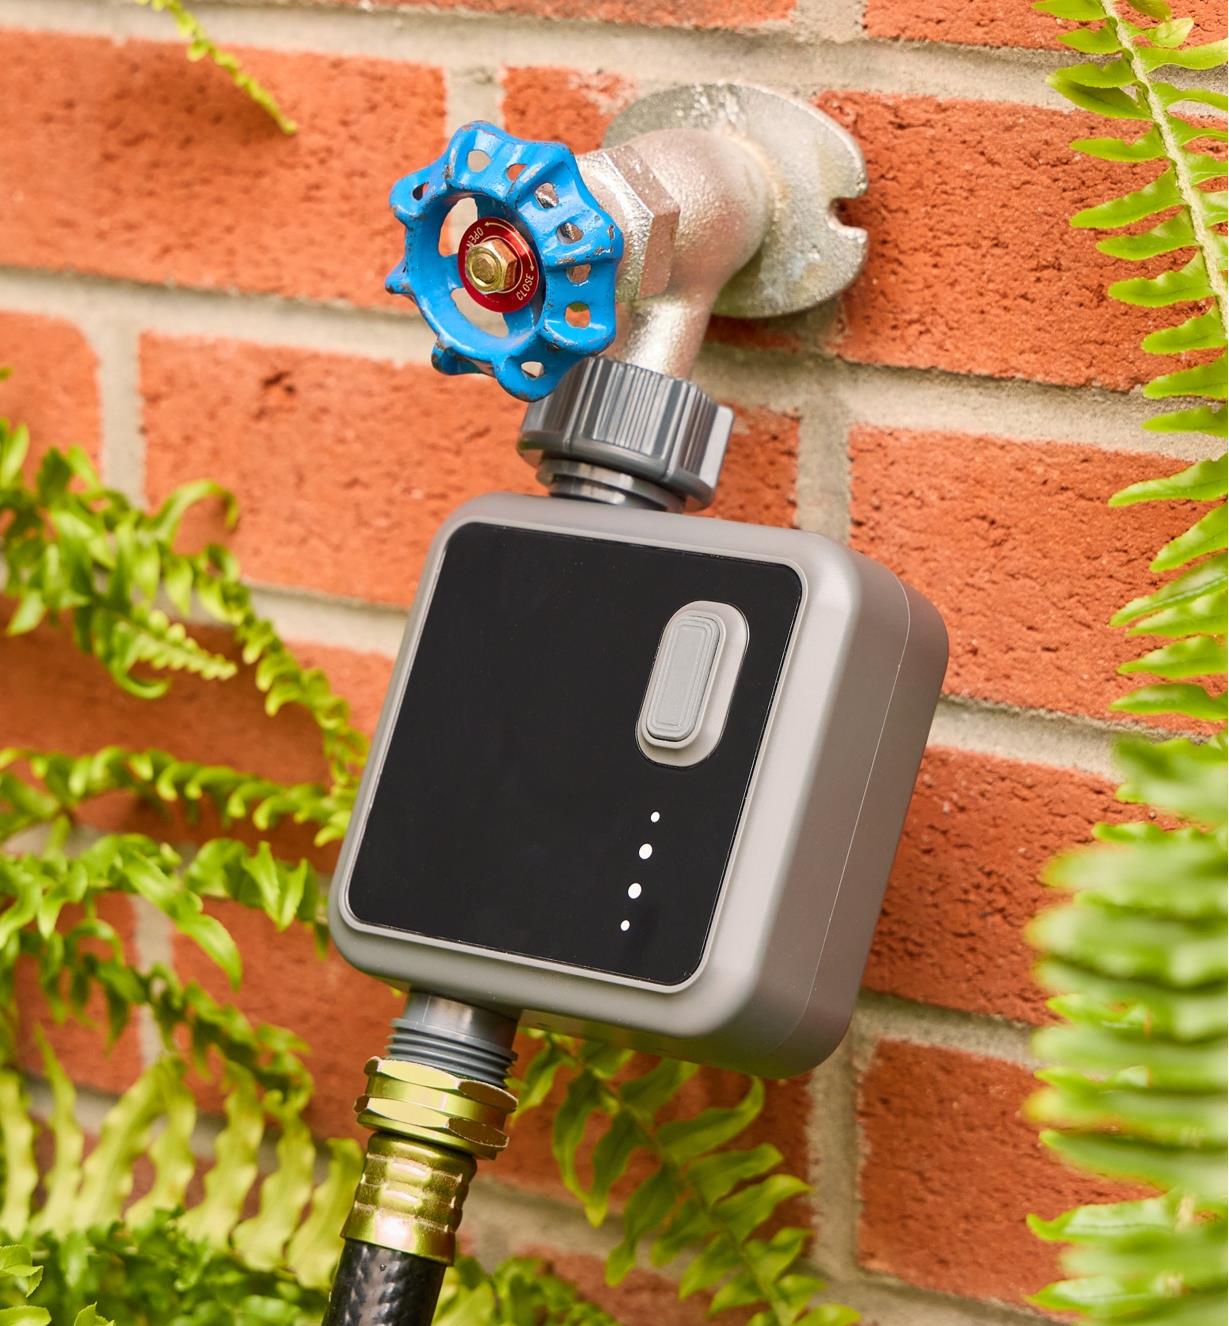 The Wi-Fi one zone water timer connected to an outdoor tap with a hose attached to the bottom